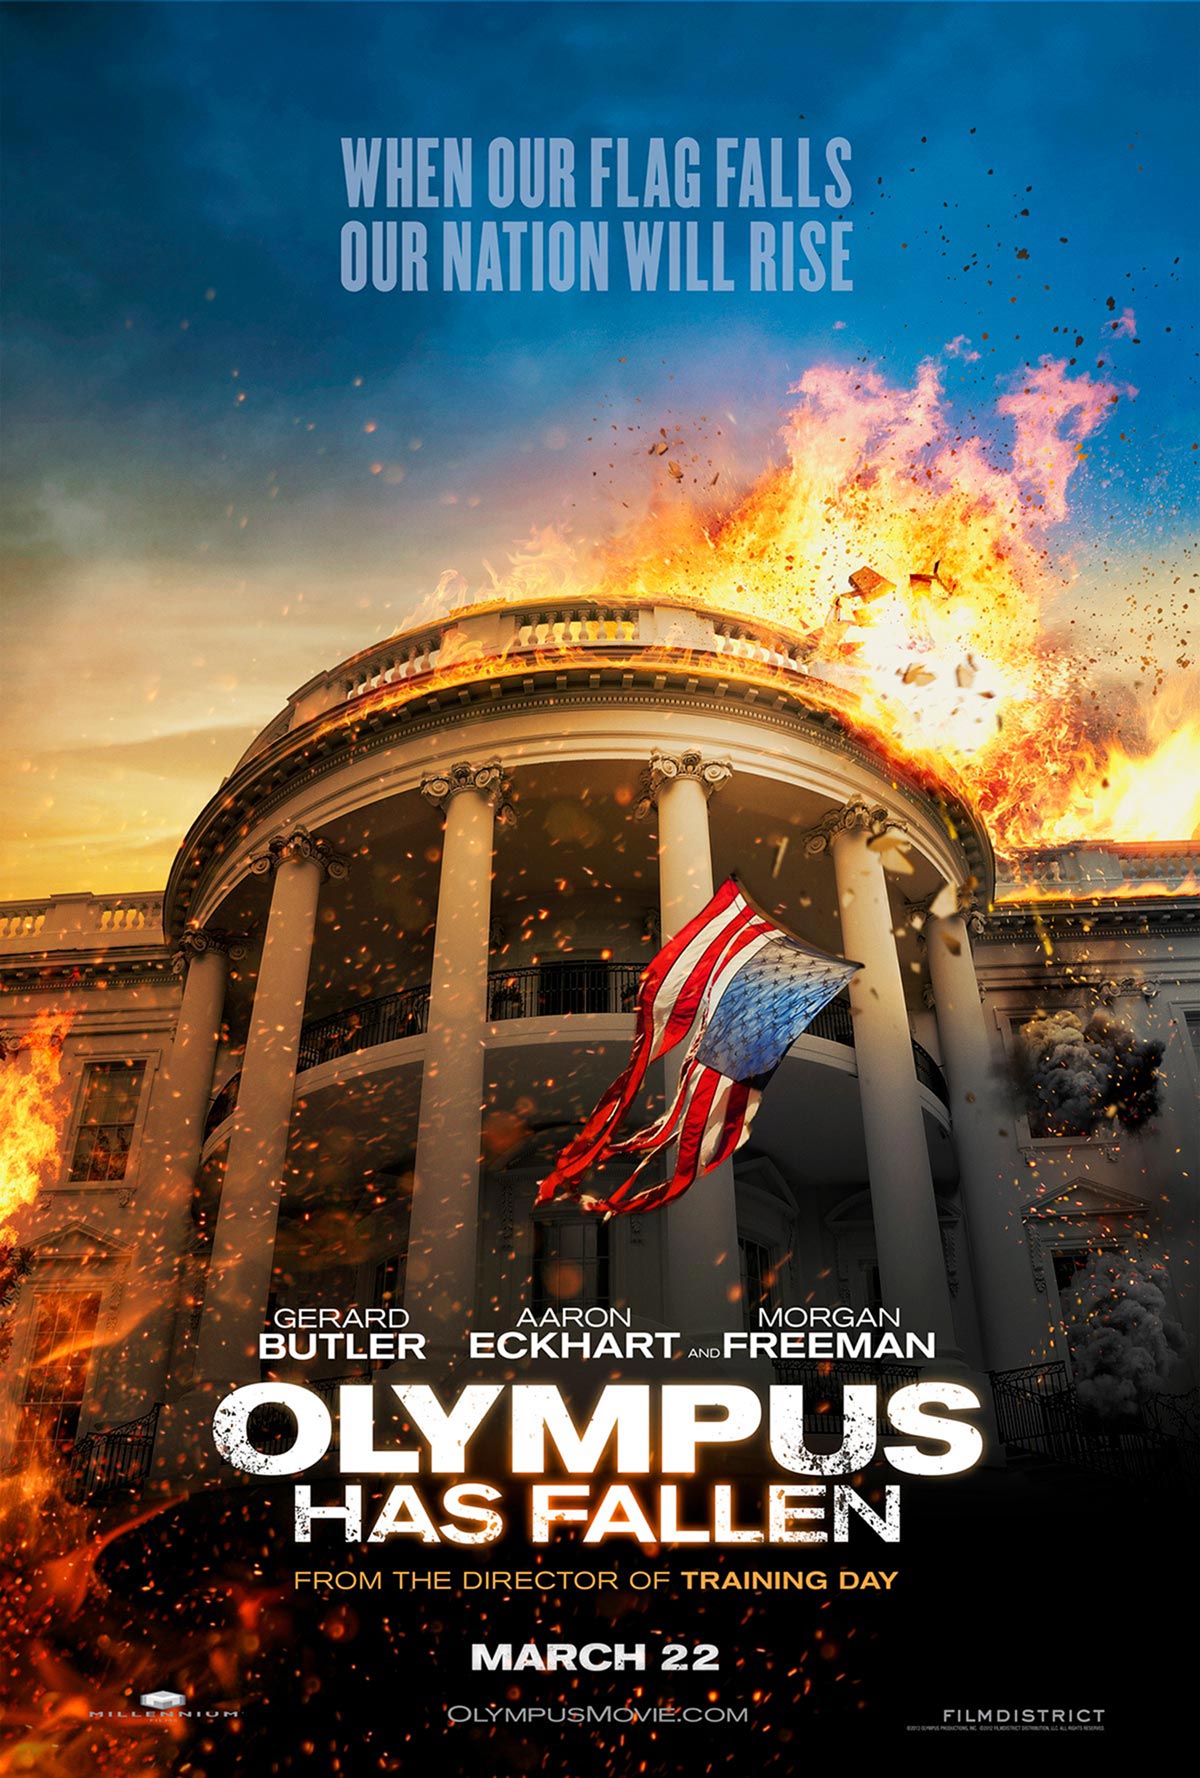 024_dreamogram-iconisus-key-art-movie-poster-olympus-has-fallen-5_vertical-cover